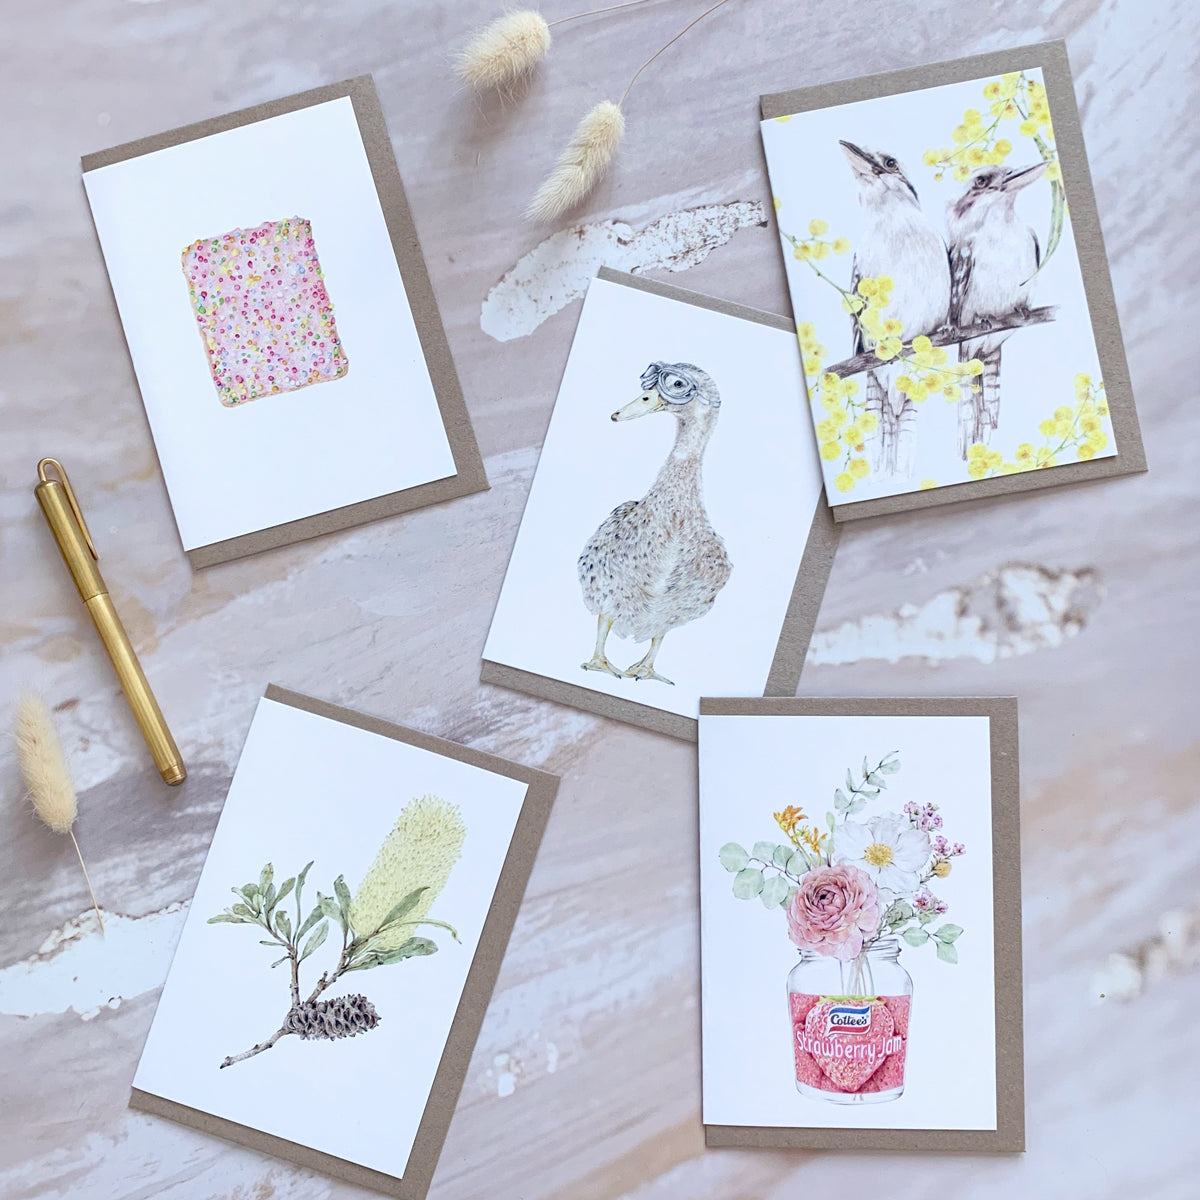 5 Greeting Cards for $30